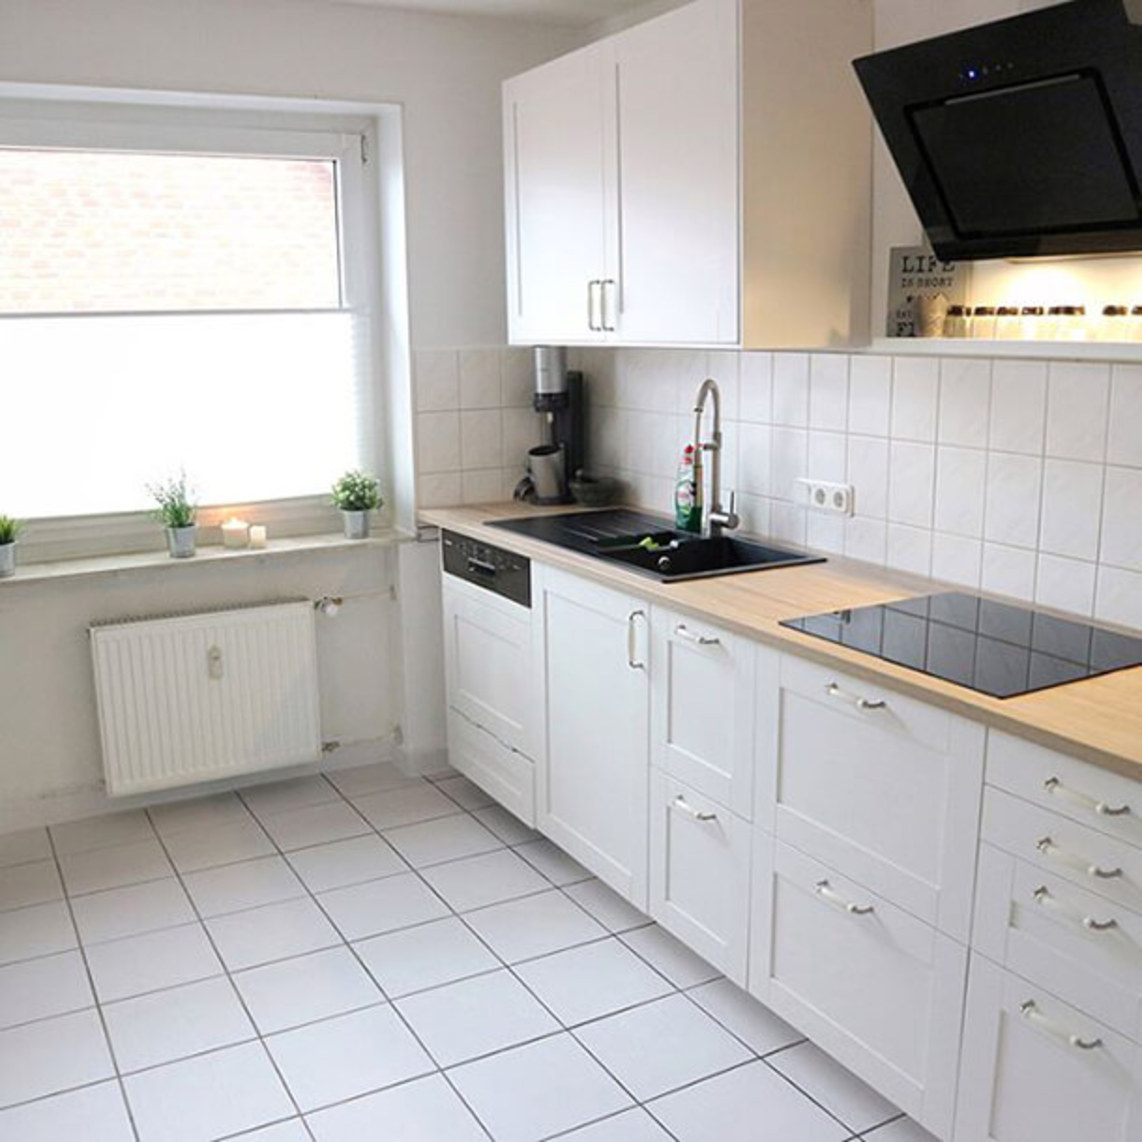 resimdo film kitchen floor tiles white wood after example